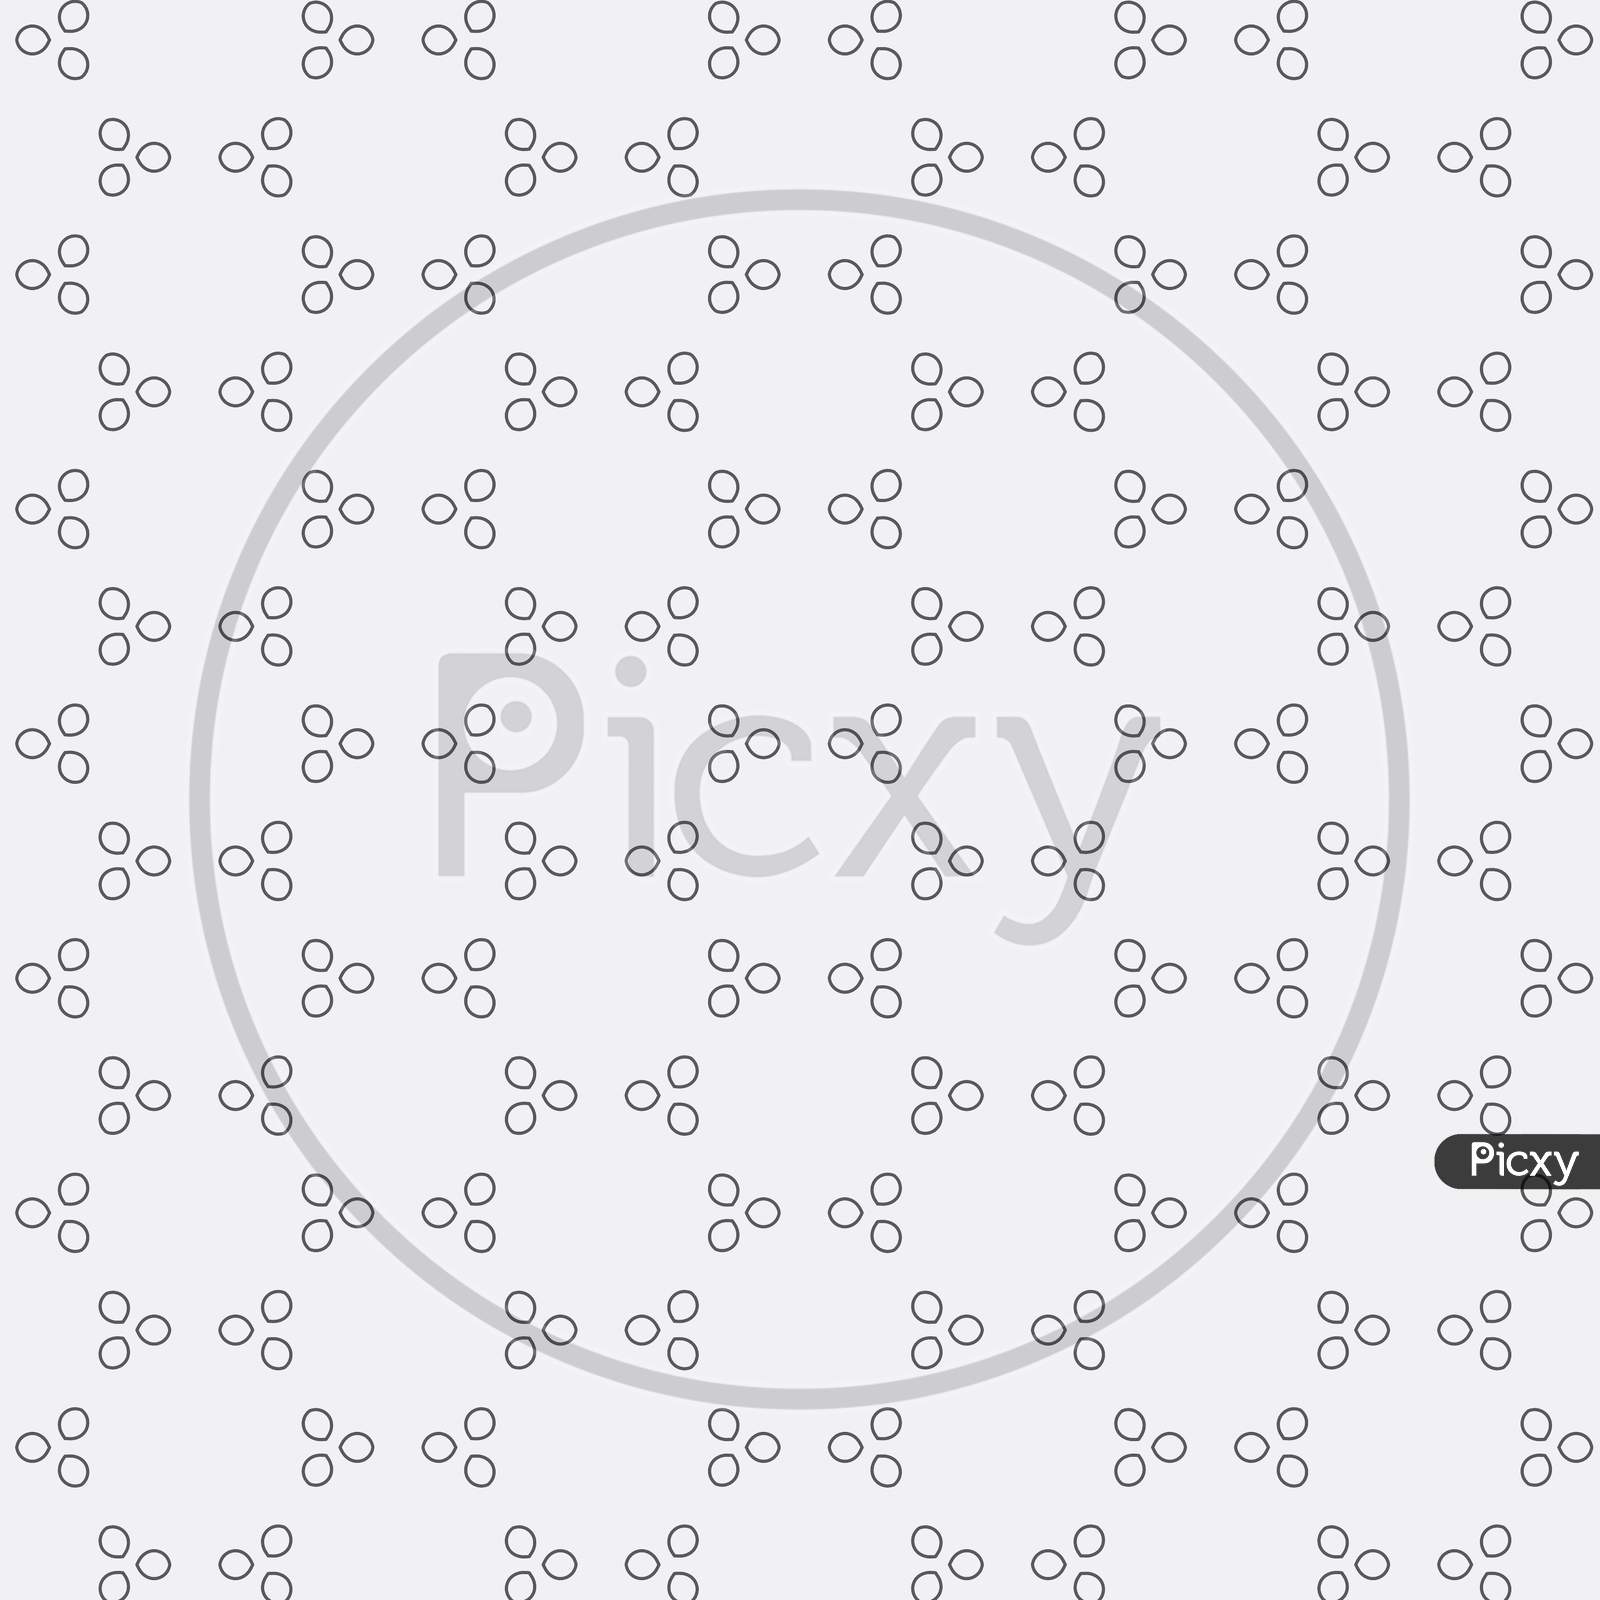 Beautiful Monochromatic Symmetrical Designs On Solid Sheet Of Wallpaper. Concept Of Home Decor And Interior Designing